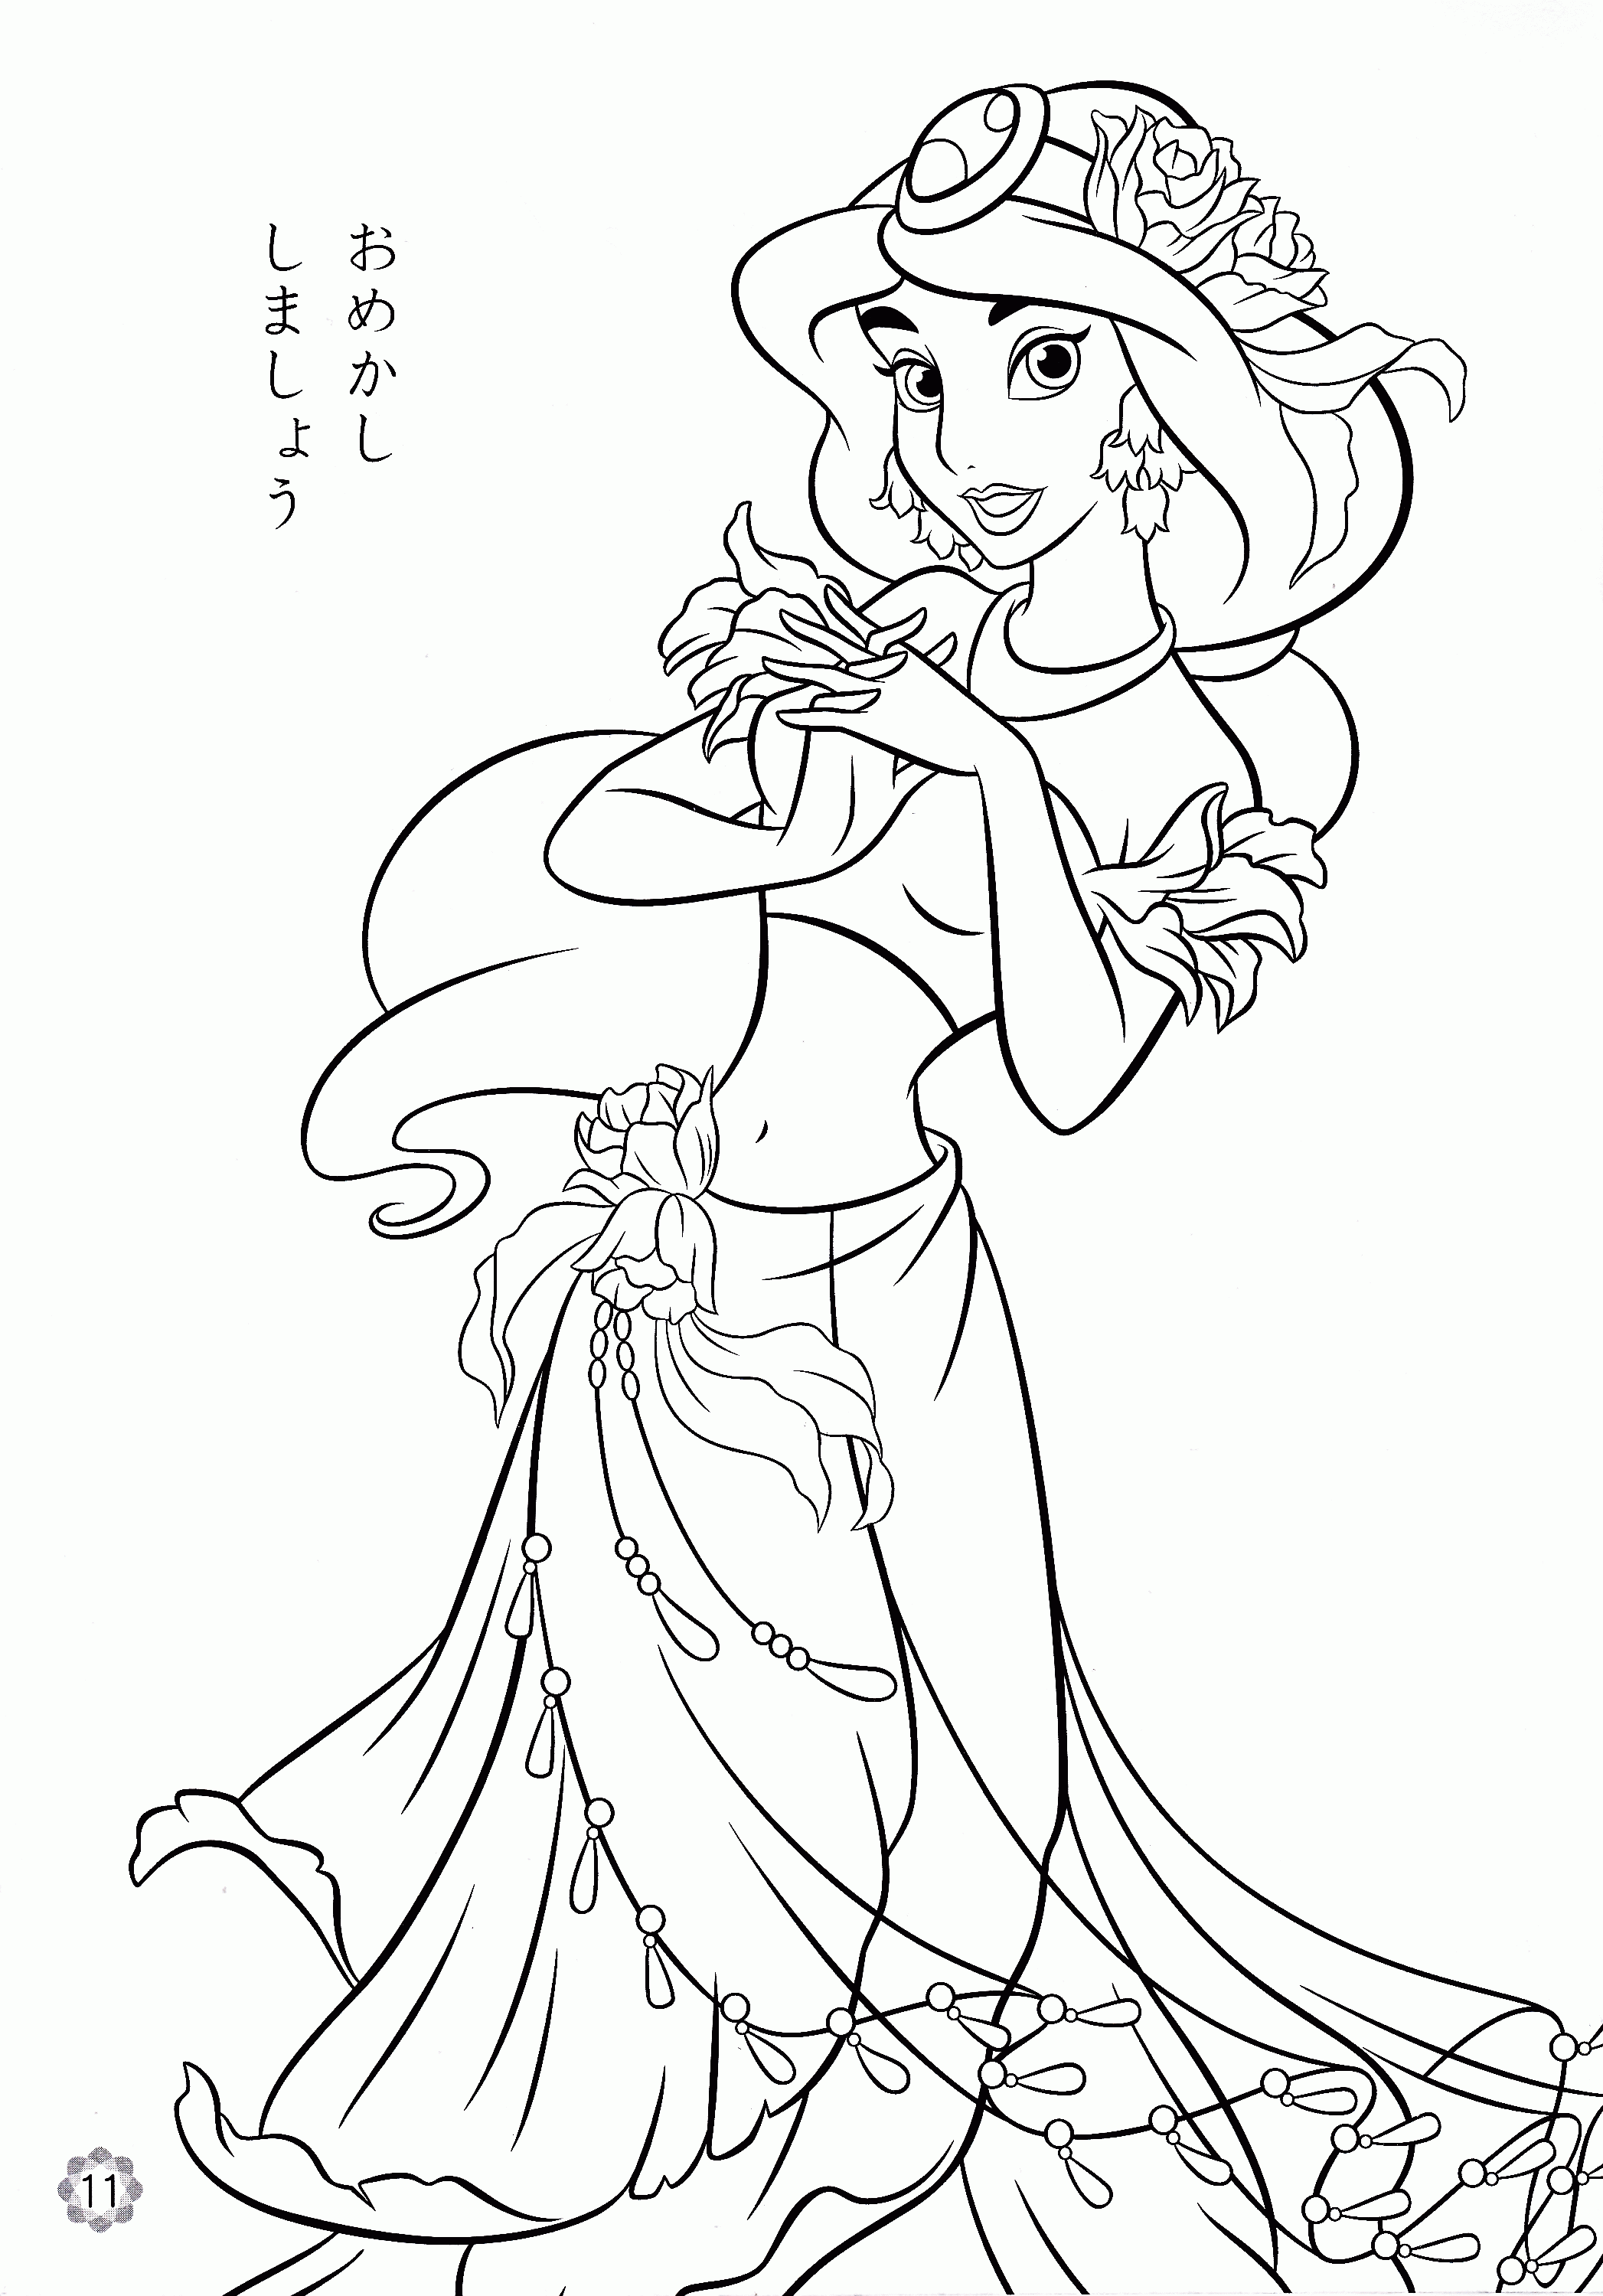 Perhaps the best 20 All Princess Coloring Pages – homeicon.info